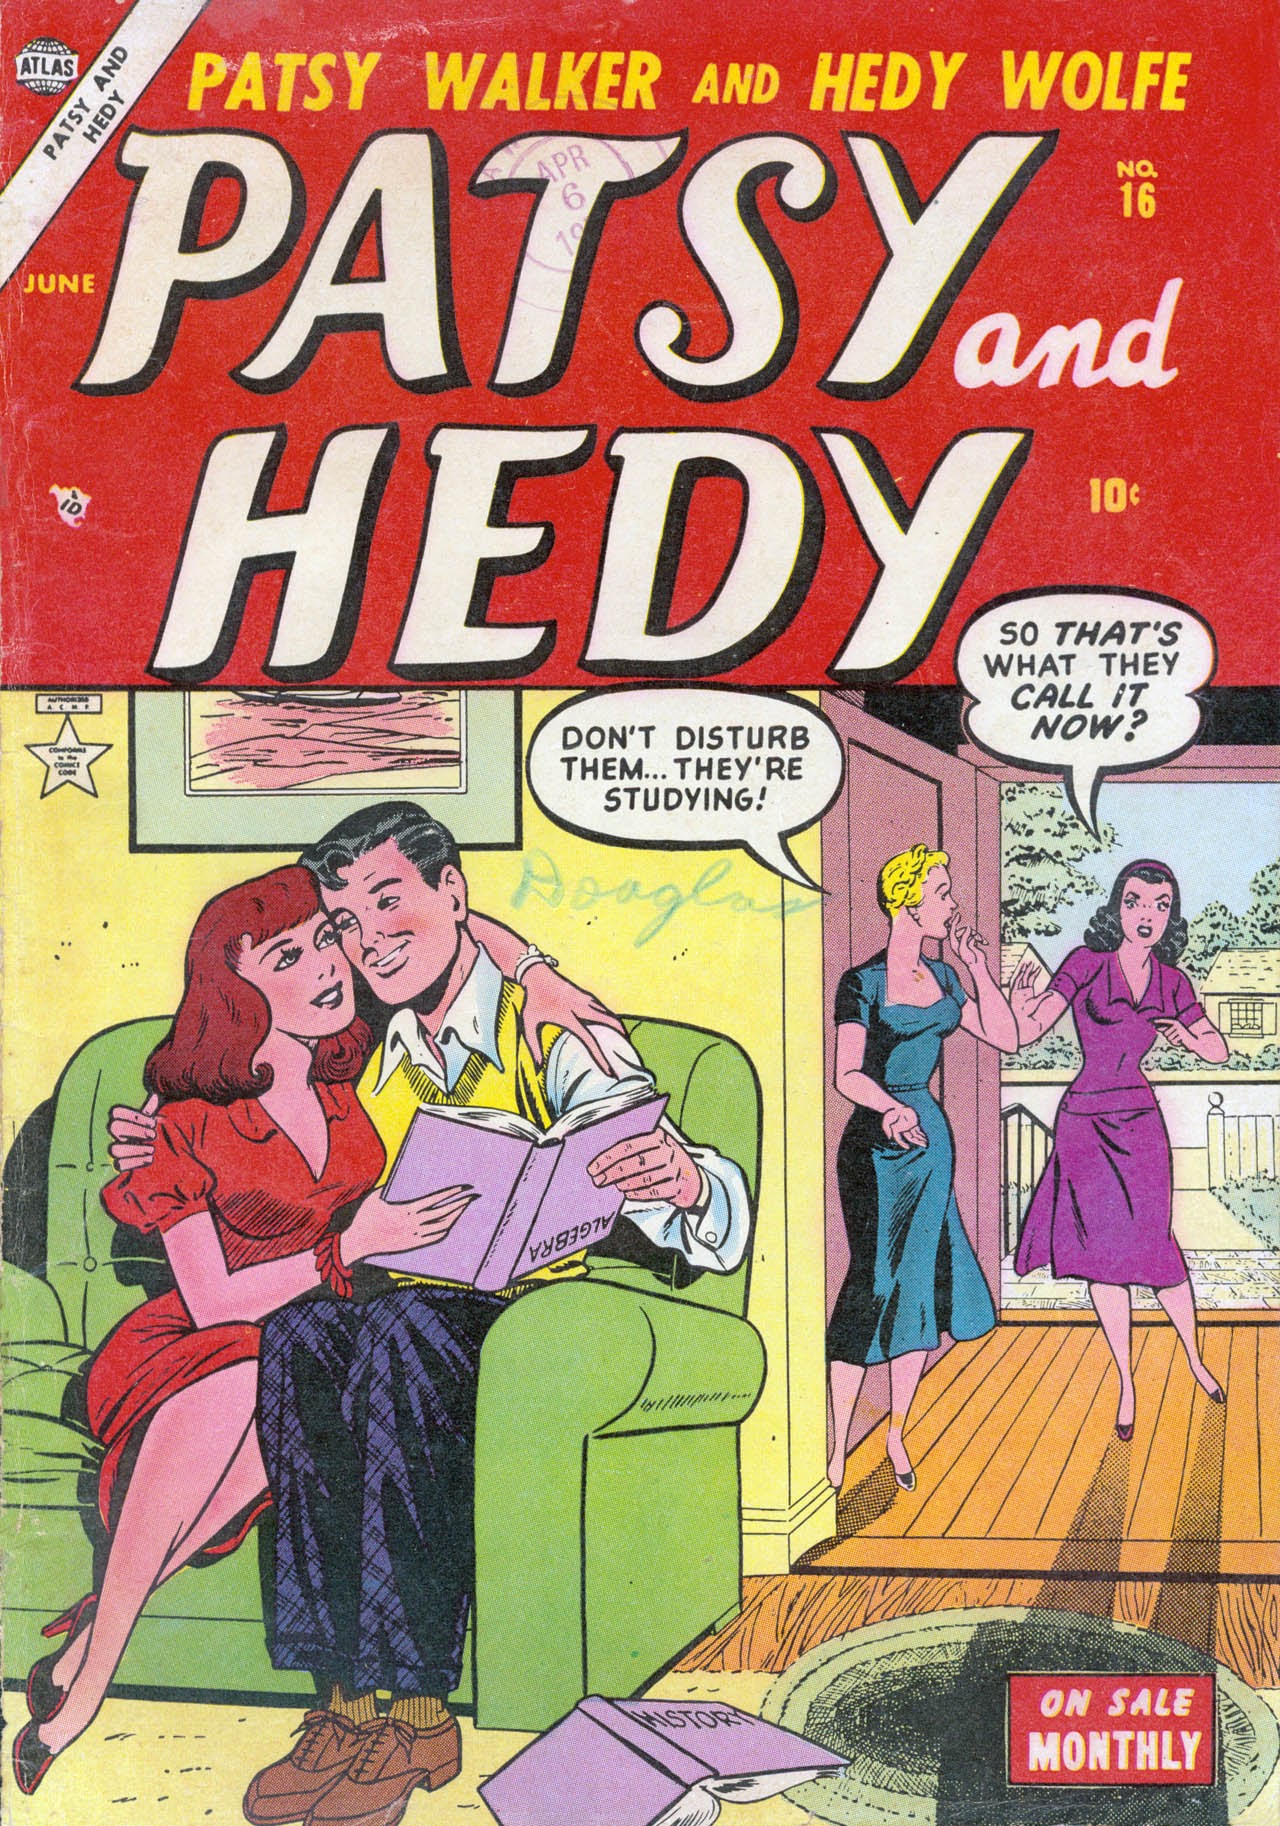 Read online Patsy and Hedy comic -  Issue #16 - 1